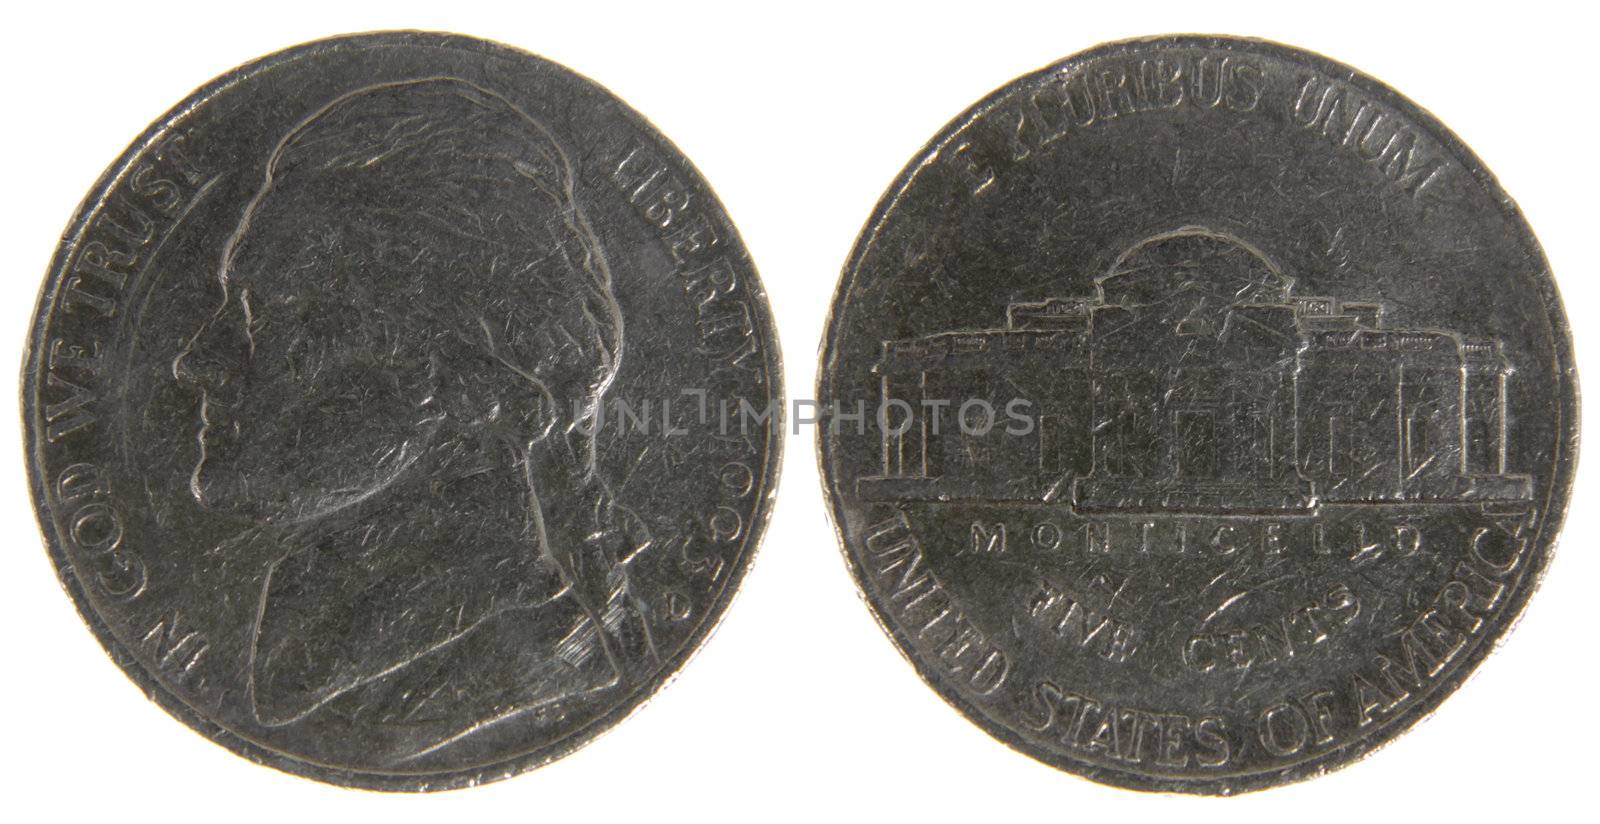 Both sides of an old (1993) US nickel, isolated on a white background.
